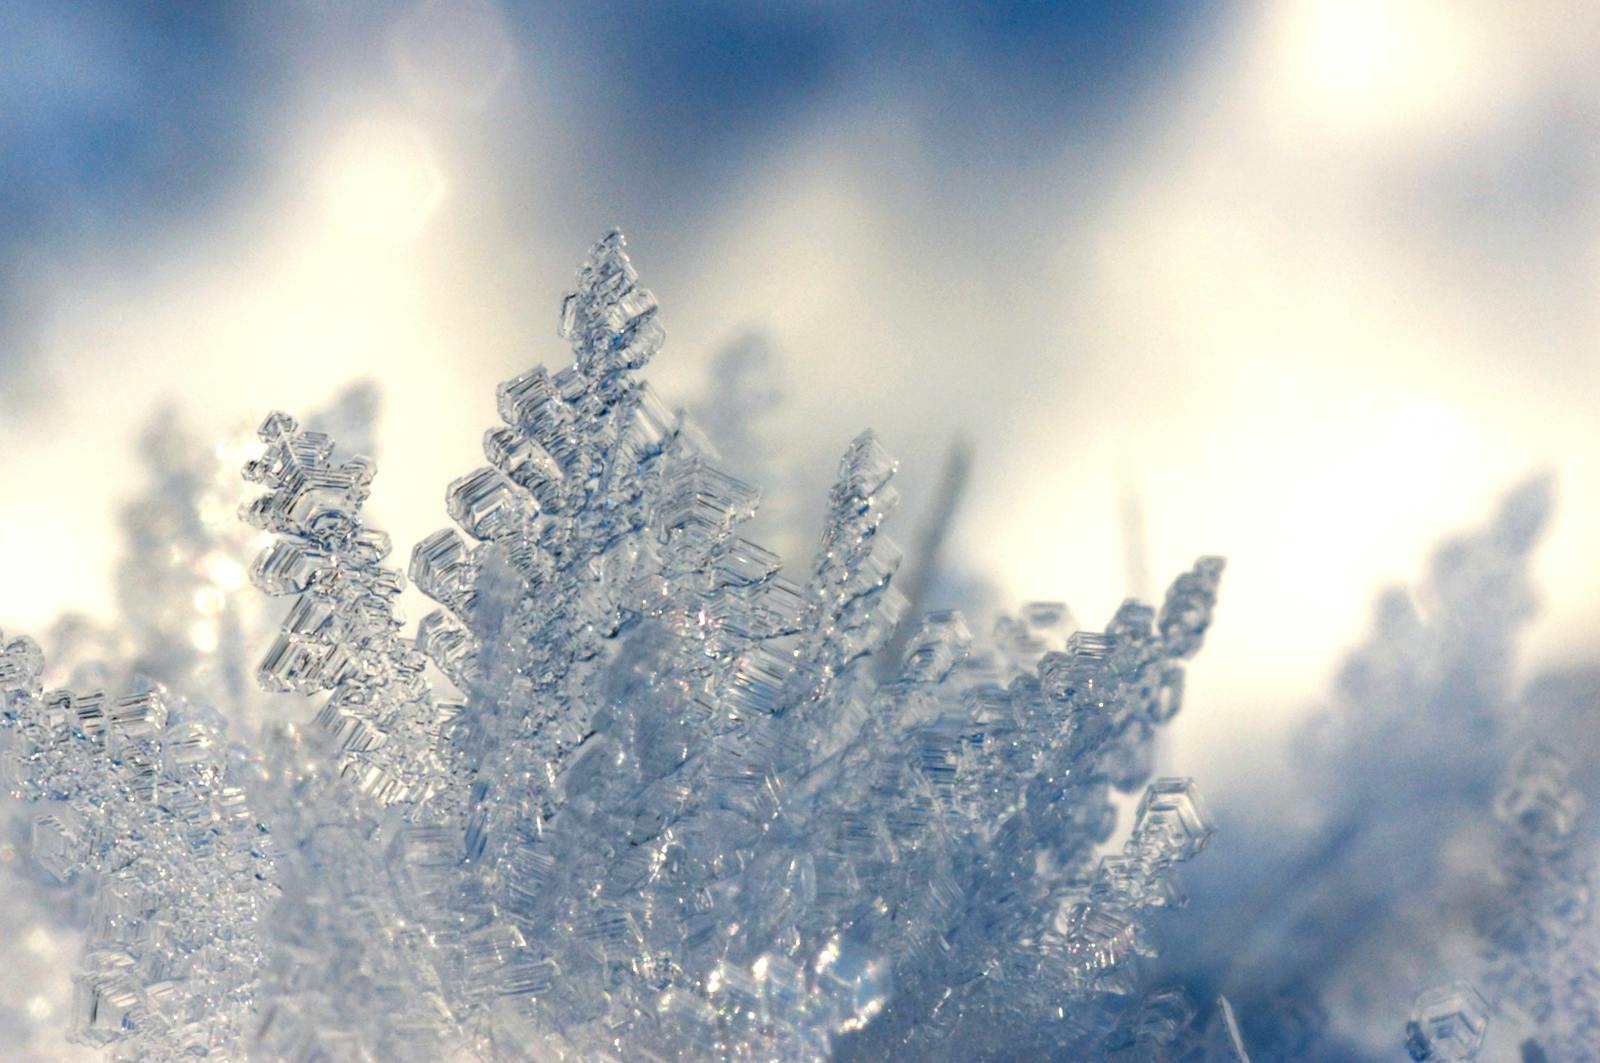 Ice Crystals Wallpapers - Top Free Ice Crystals Backgrounds ...